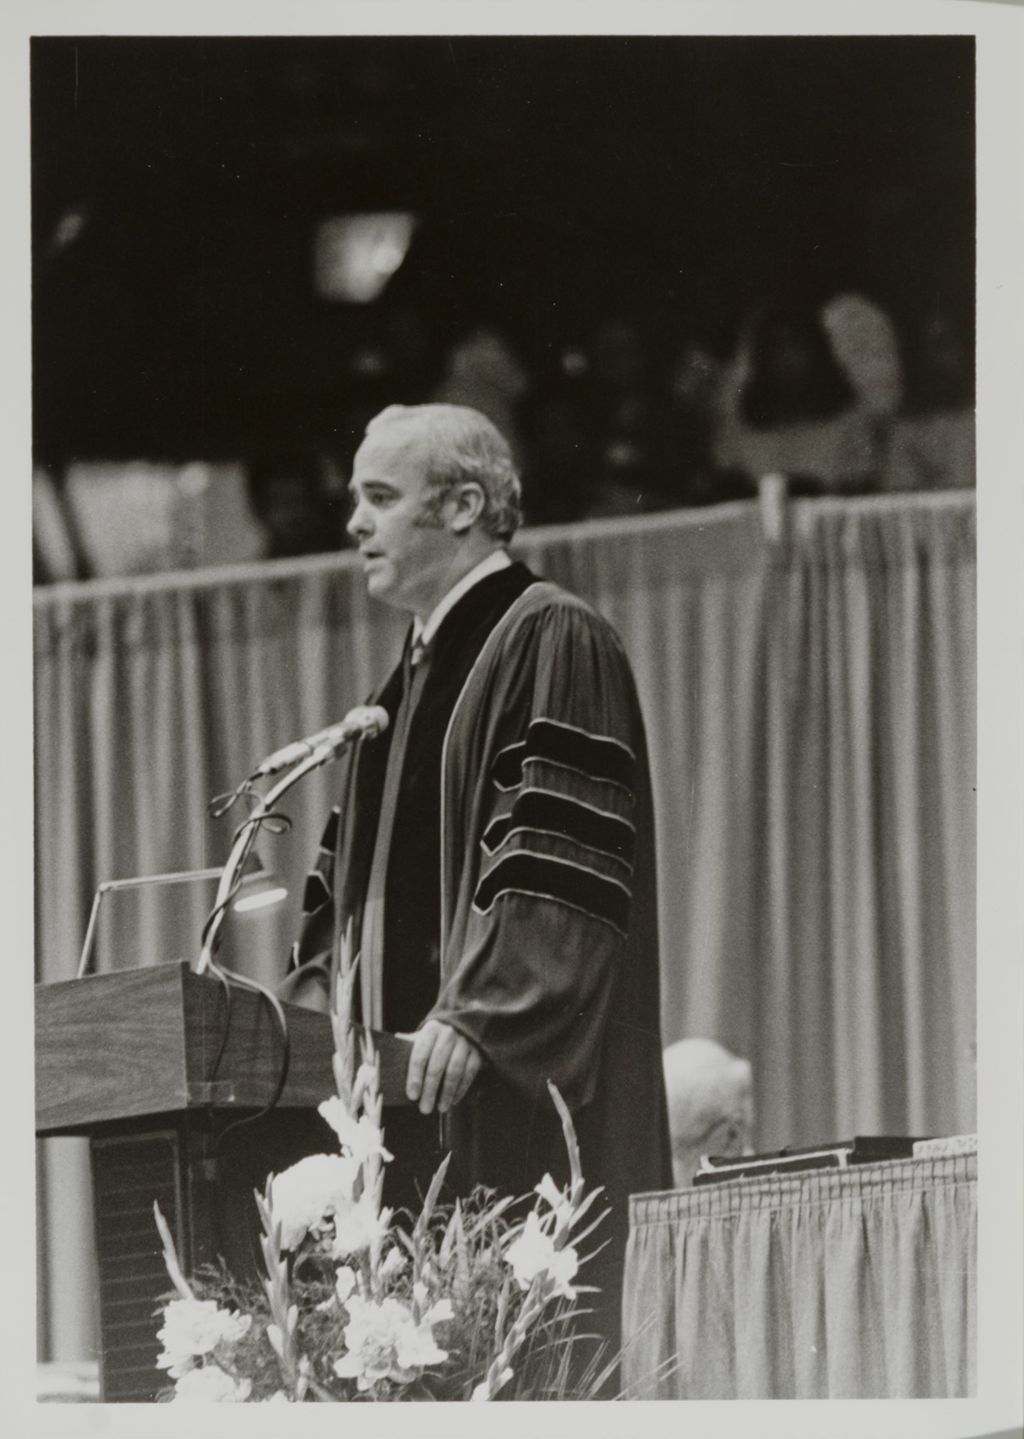 Miniature of William D. Forsyth, Jr. addressing the audience at the graduation ceremony